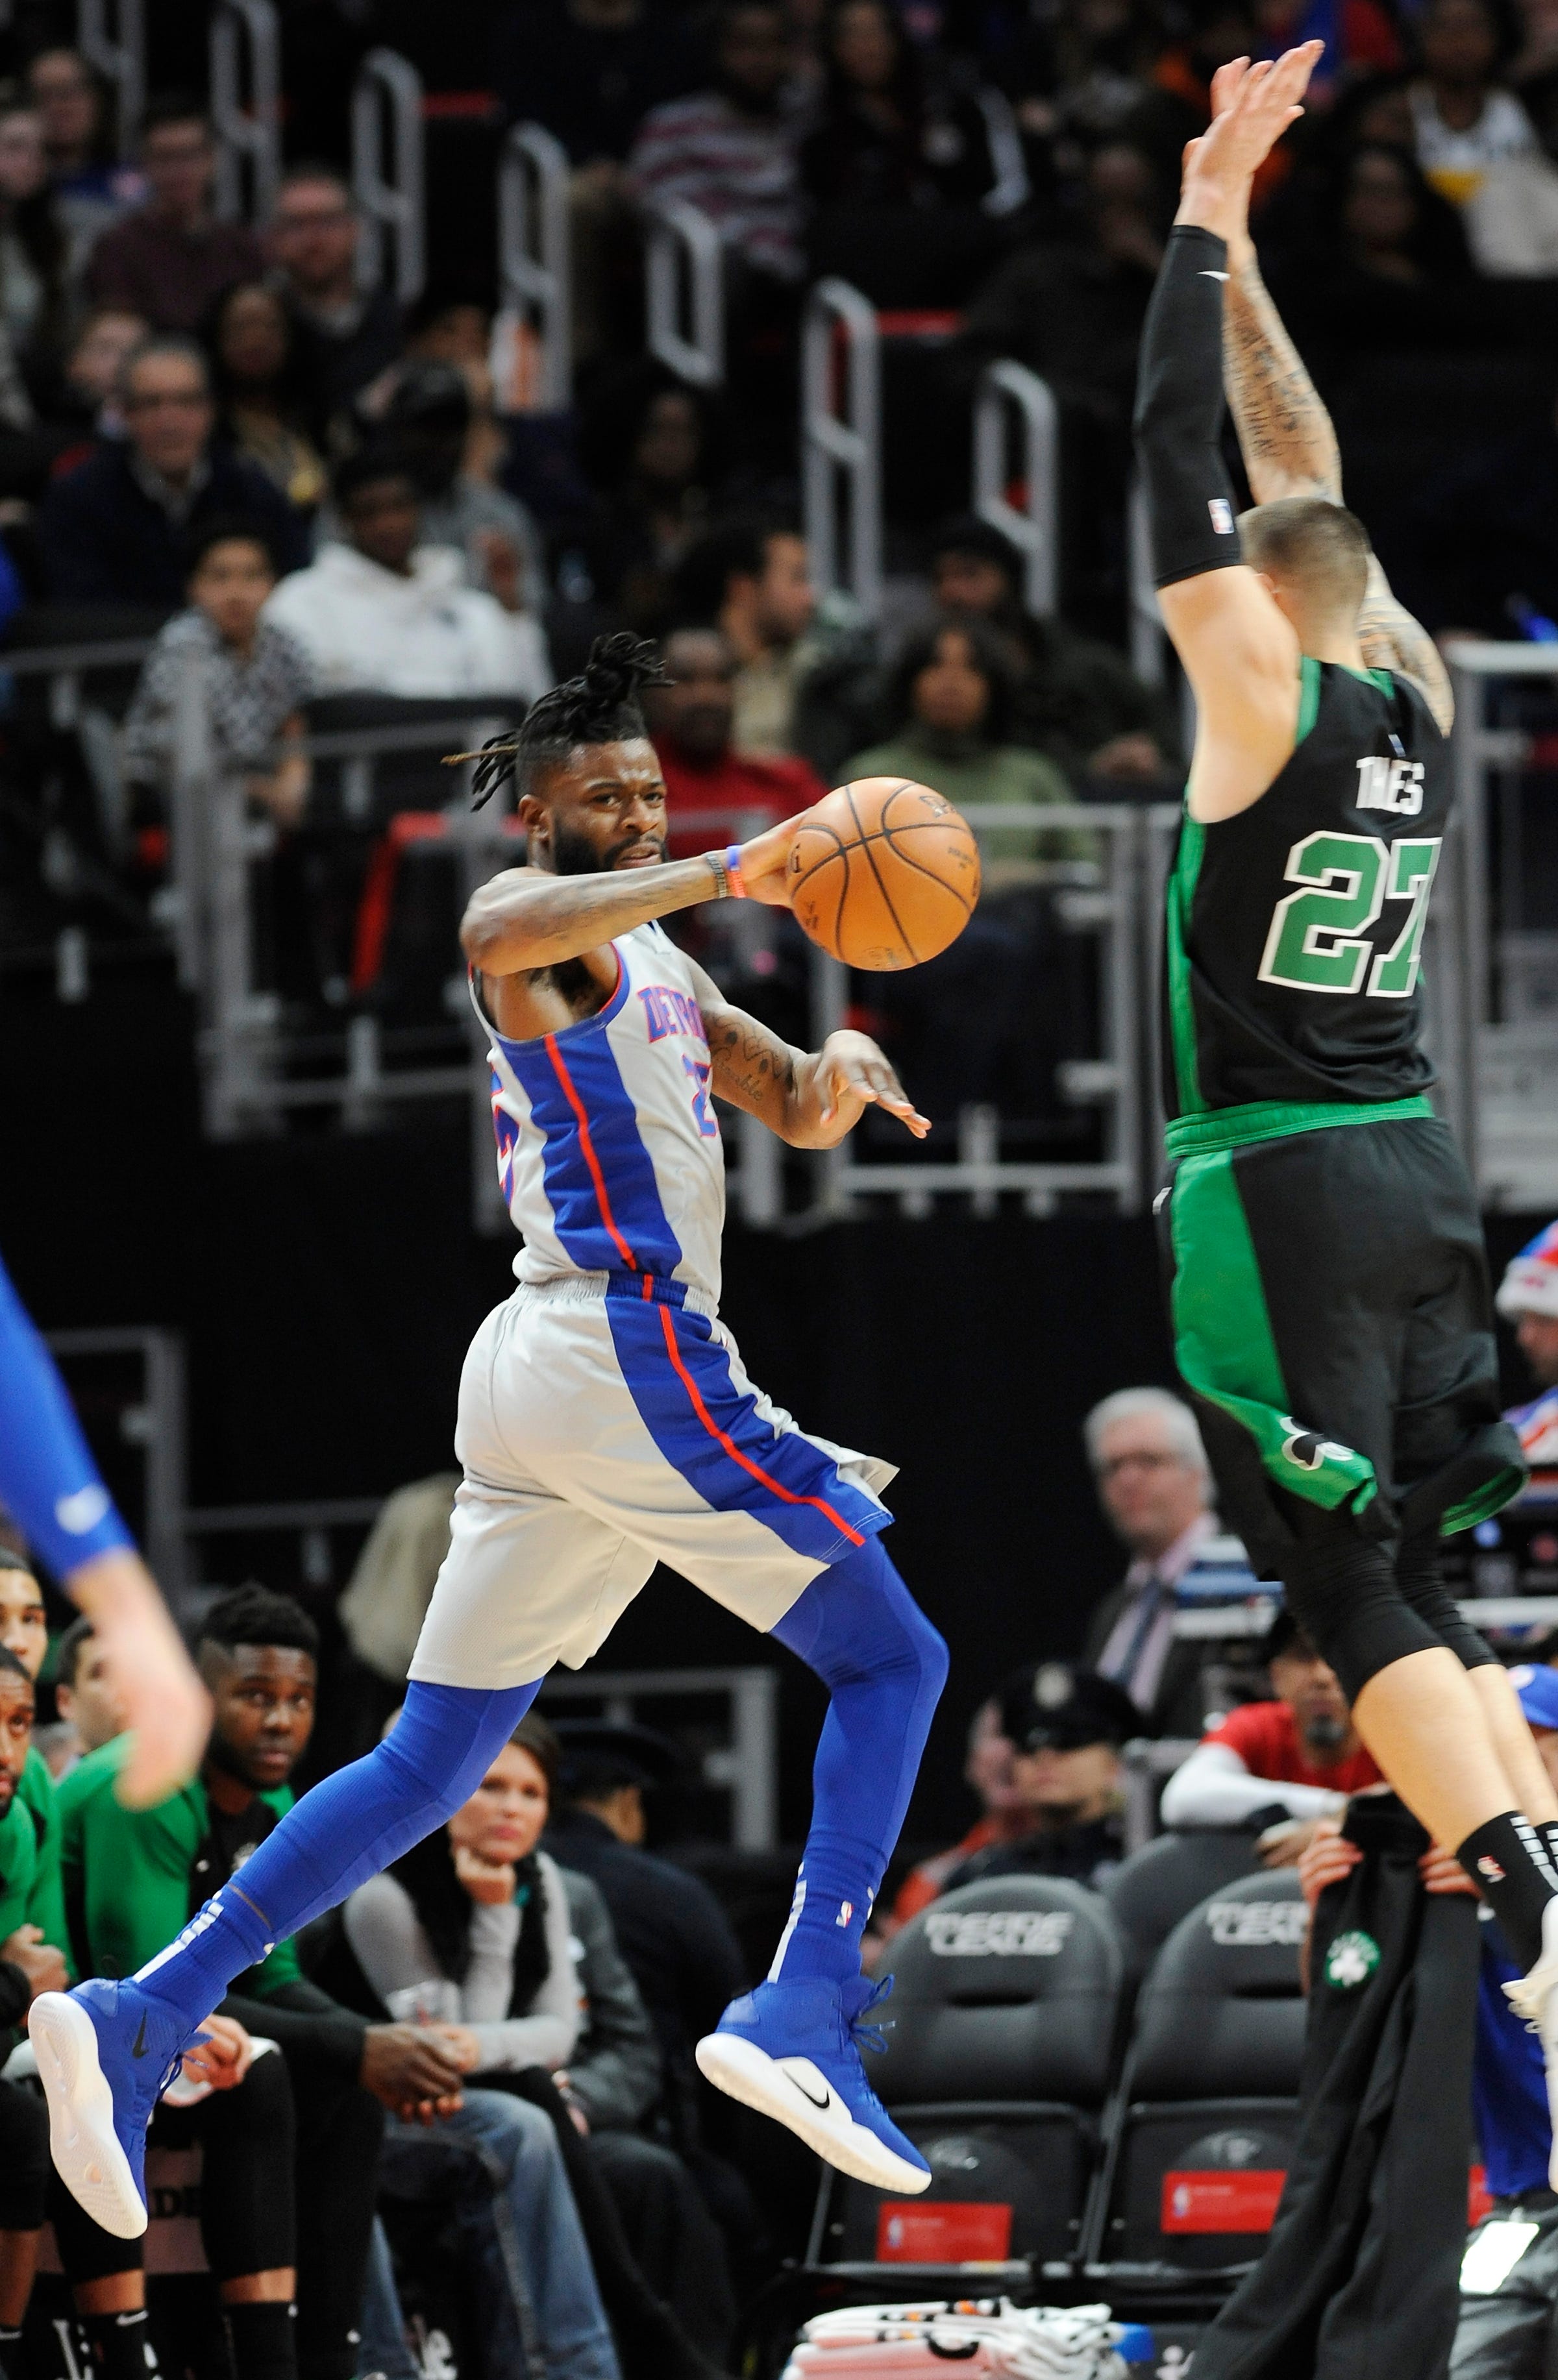 Pistons ' Reggie Bullock makes a pass over the Celtics ' Daniel Theis during the first quarter of an NBA basketball game between the Detroit Pistons and the Boston Celtics at Little Caesars Arena on Saturday, December,15, 2018, in Detroit, Michigan.